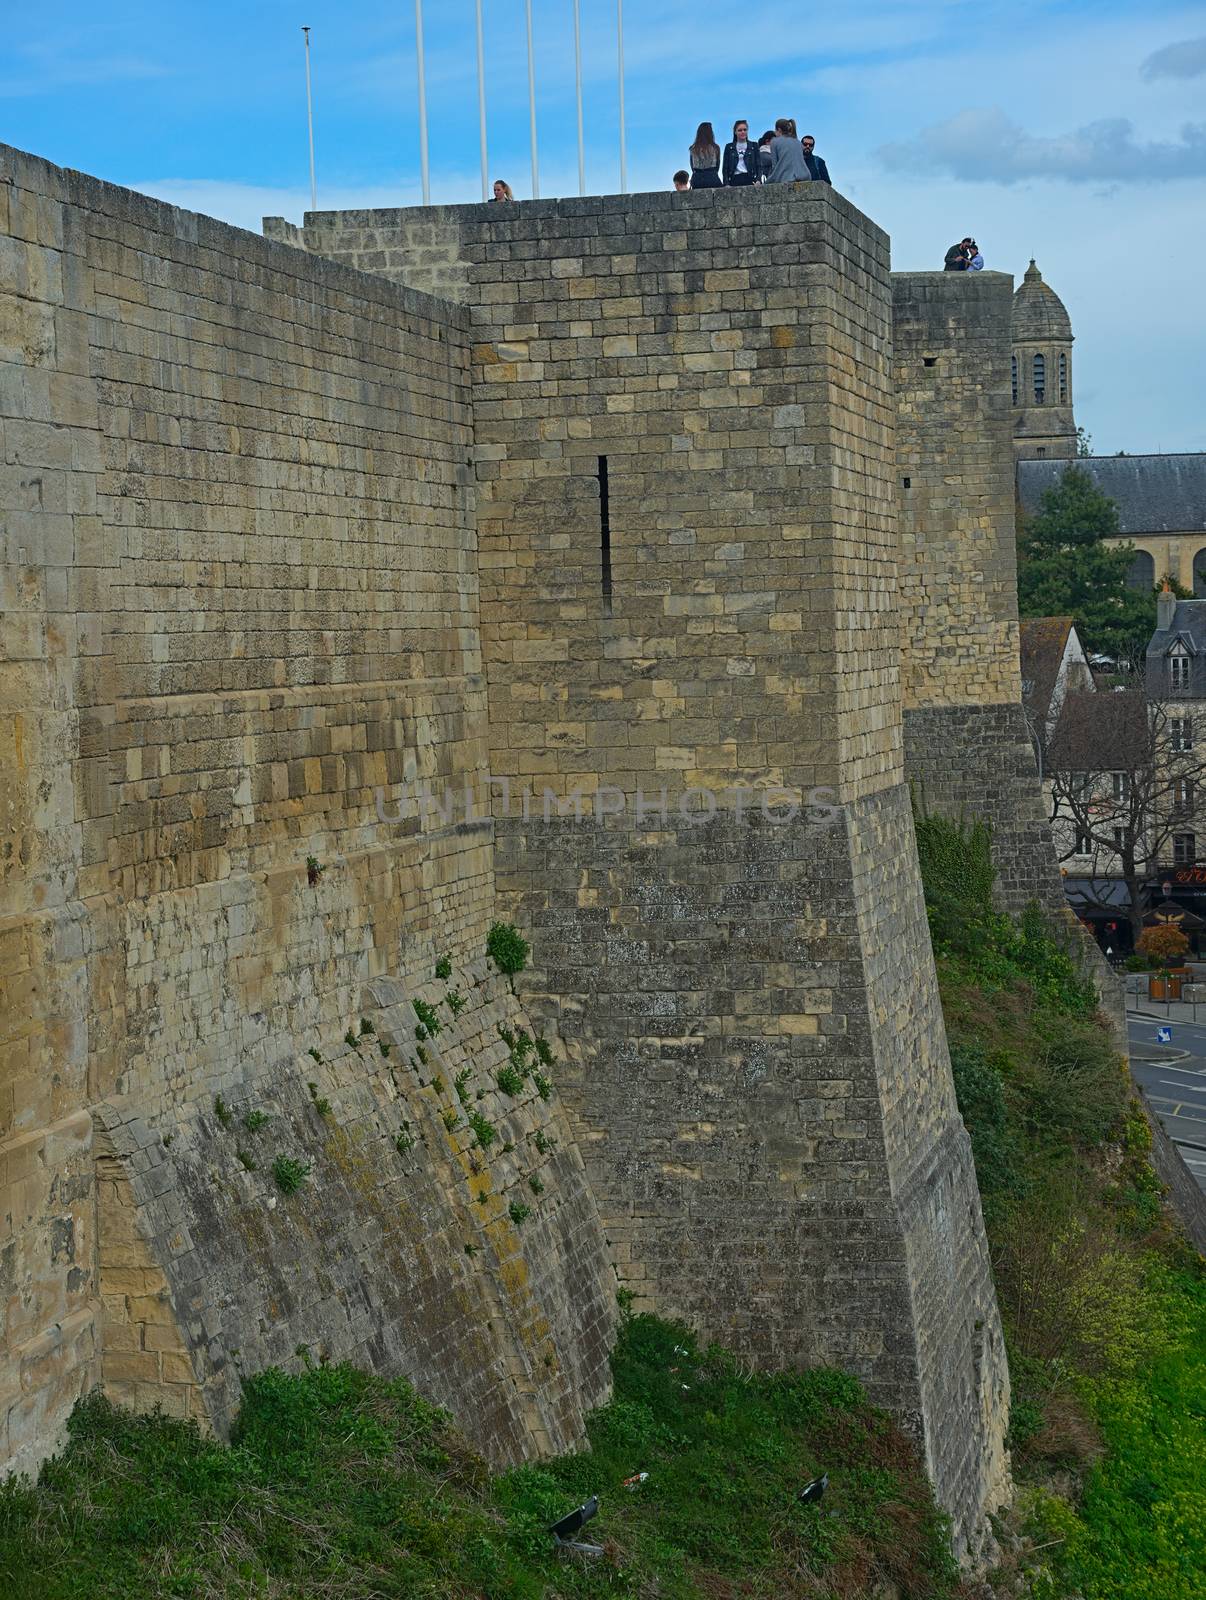 CAEN, FRANCE - April 7th 2019 - View on huge stone defensive wall and tower at fortress by sheriffkule